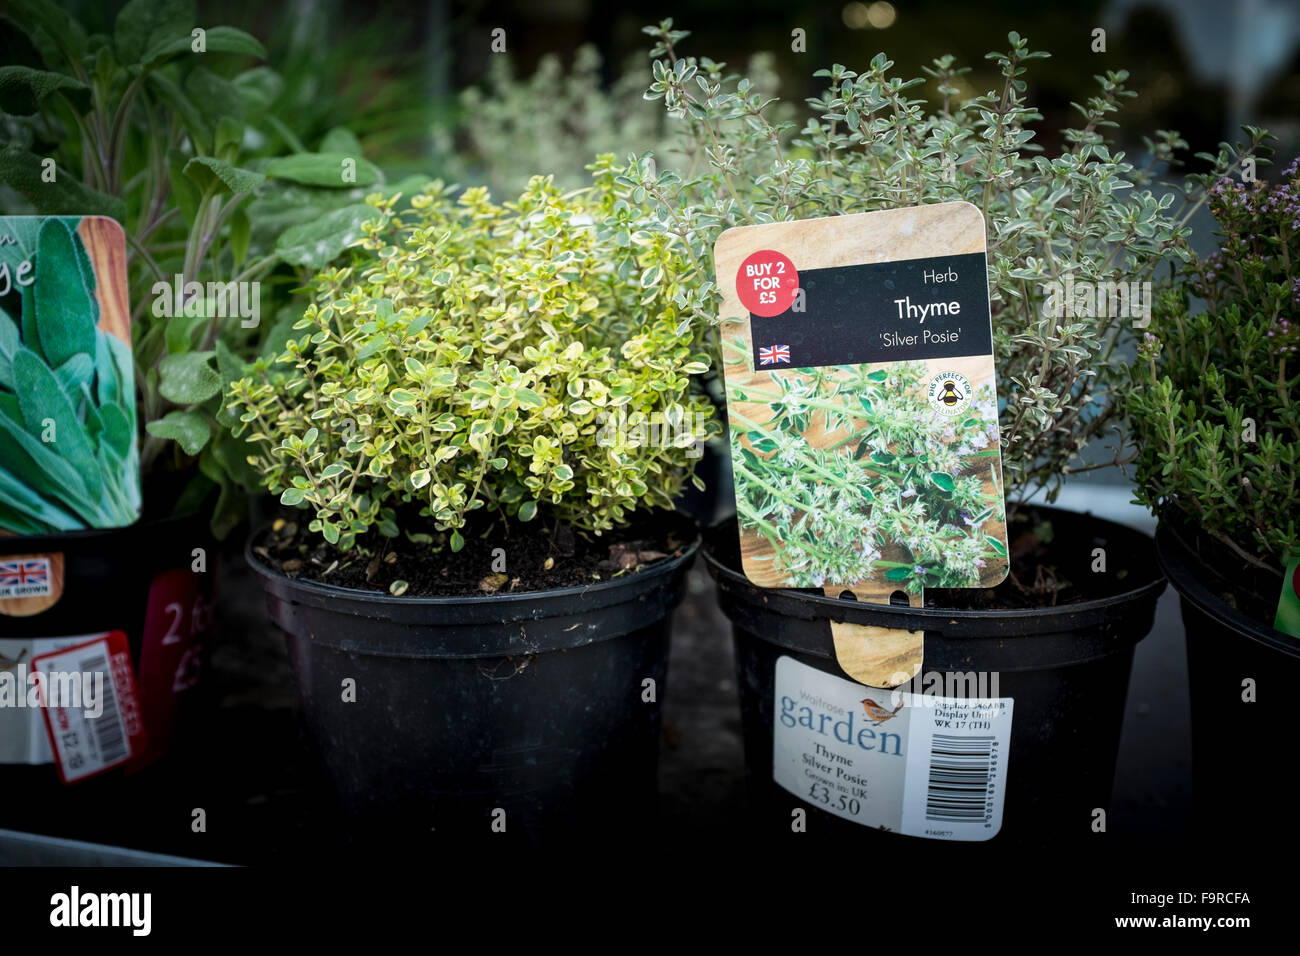 Herb Thyme in a pot on display at Waitrose, UK Stock Photo